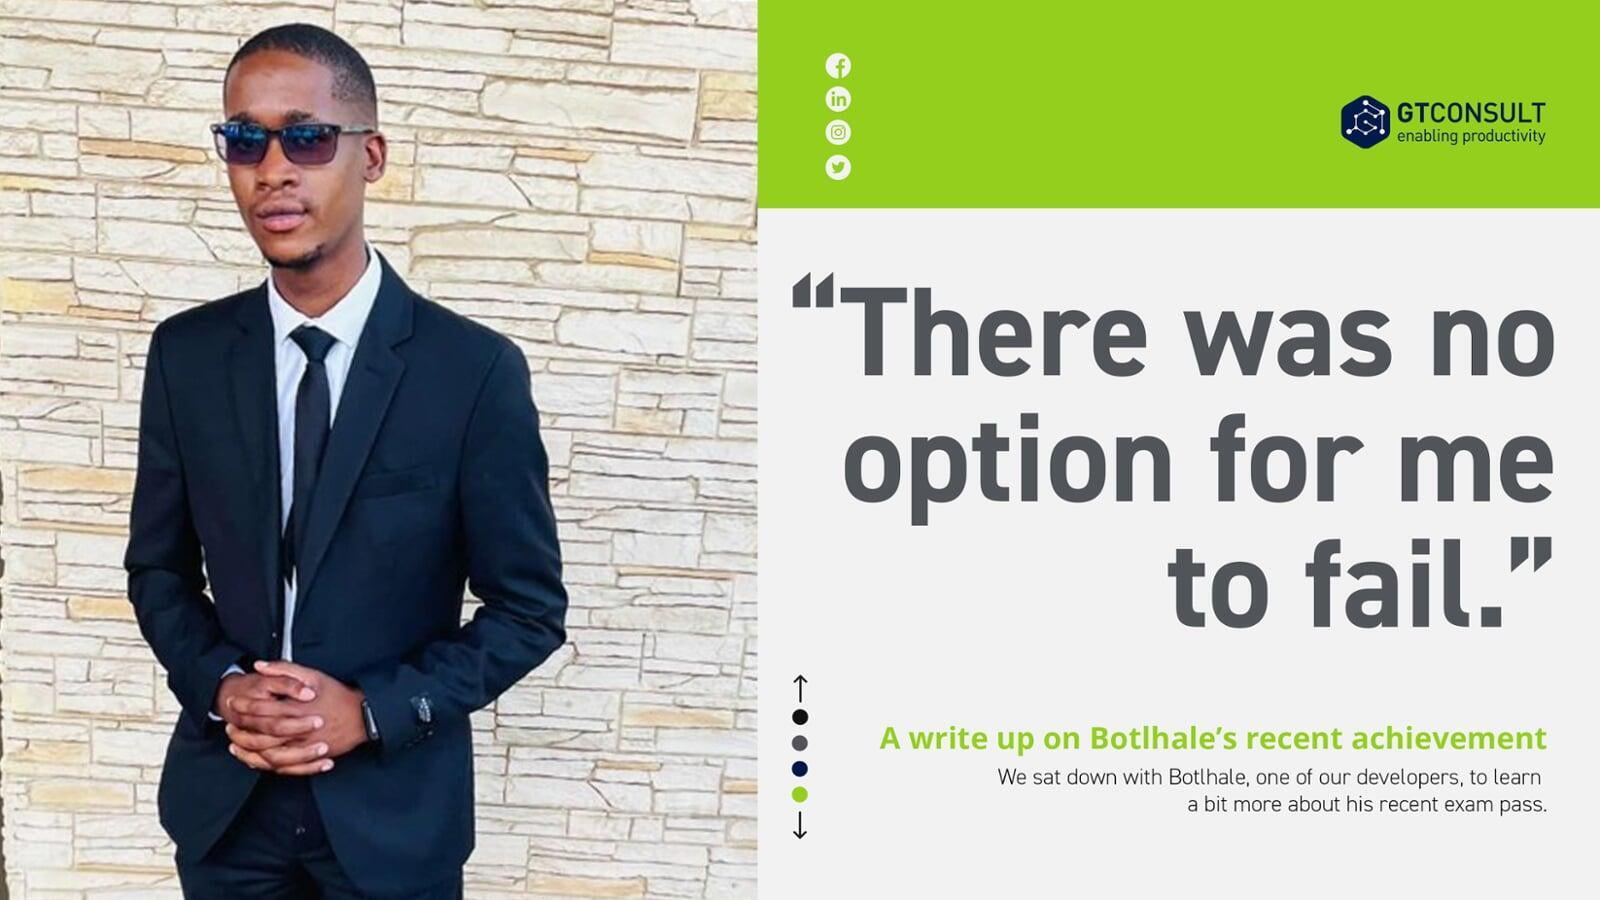 Botlhale is determined to succeed!